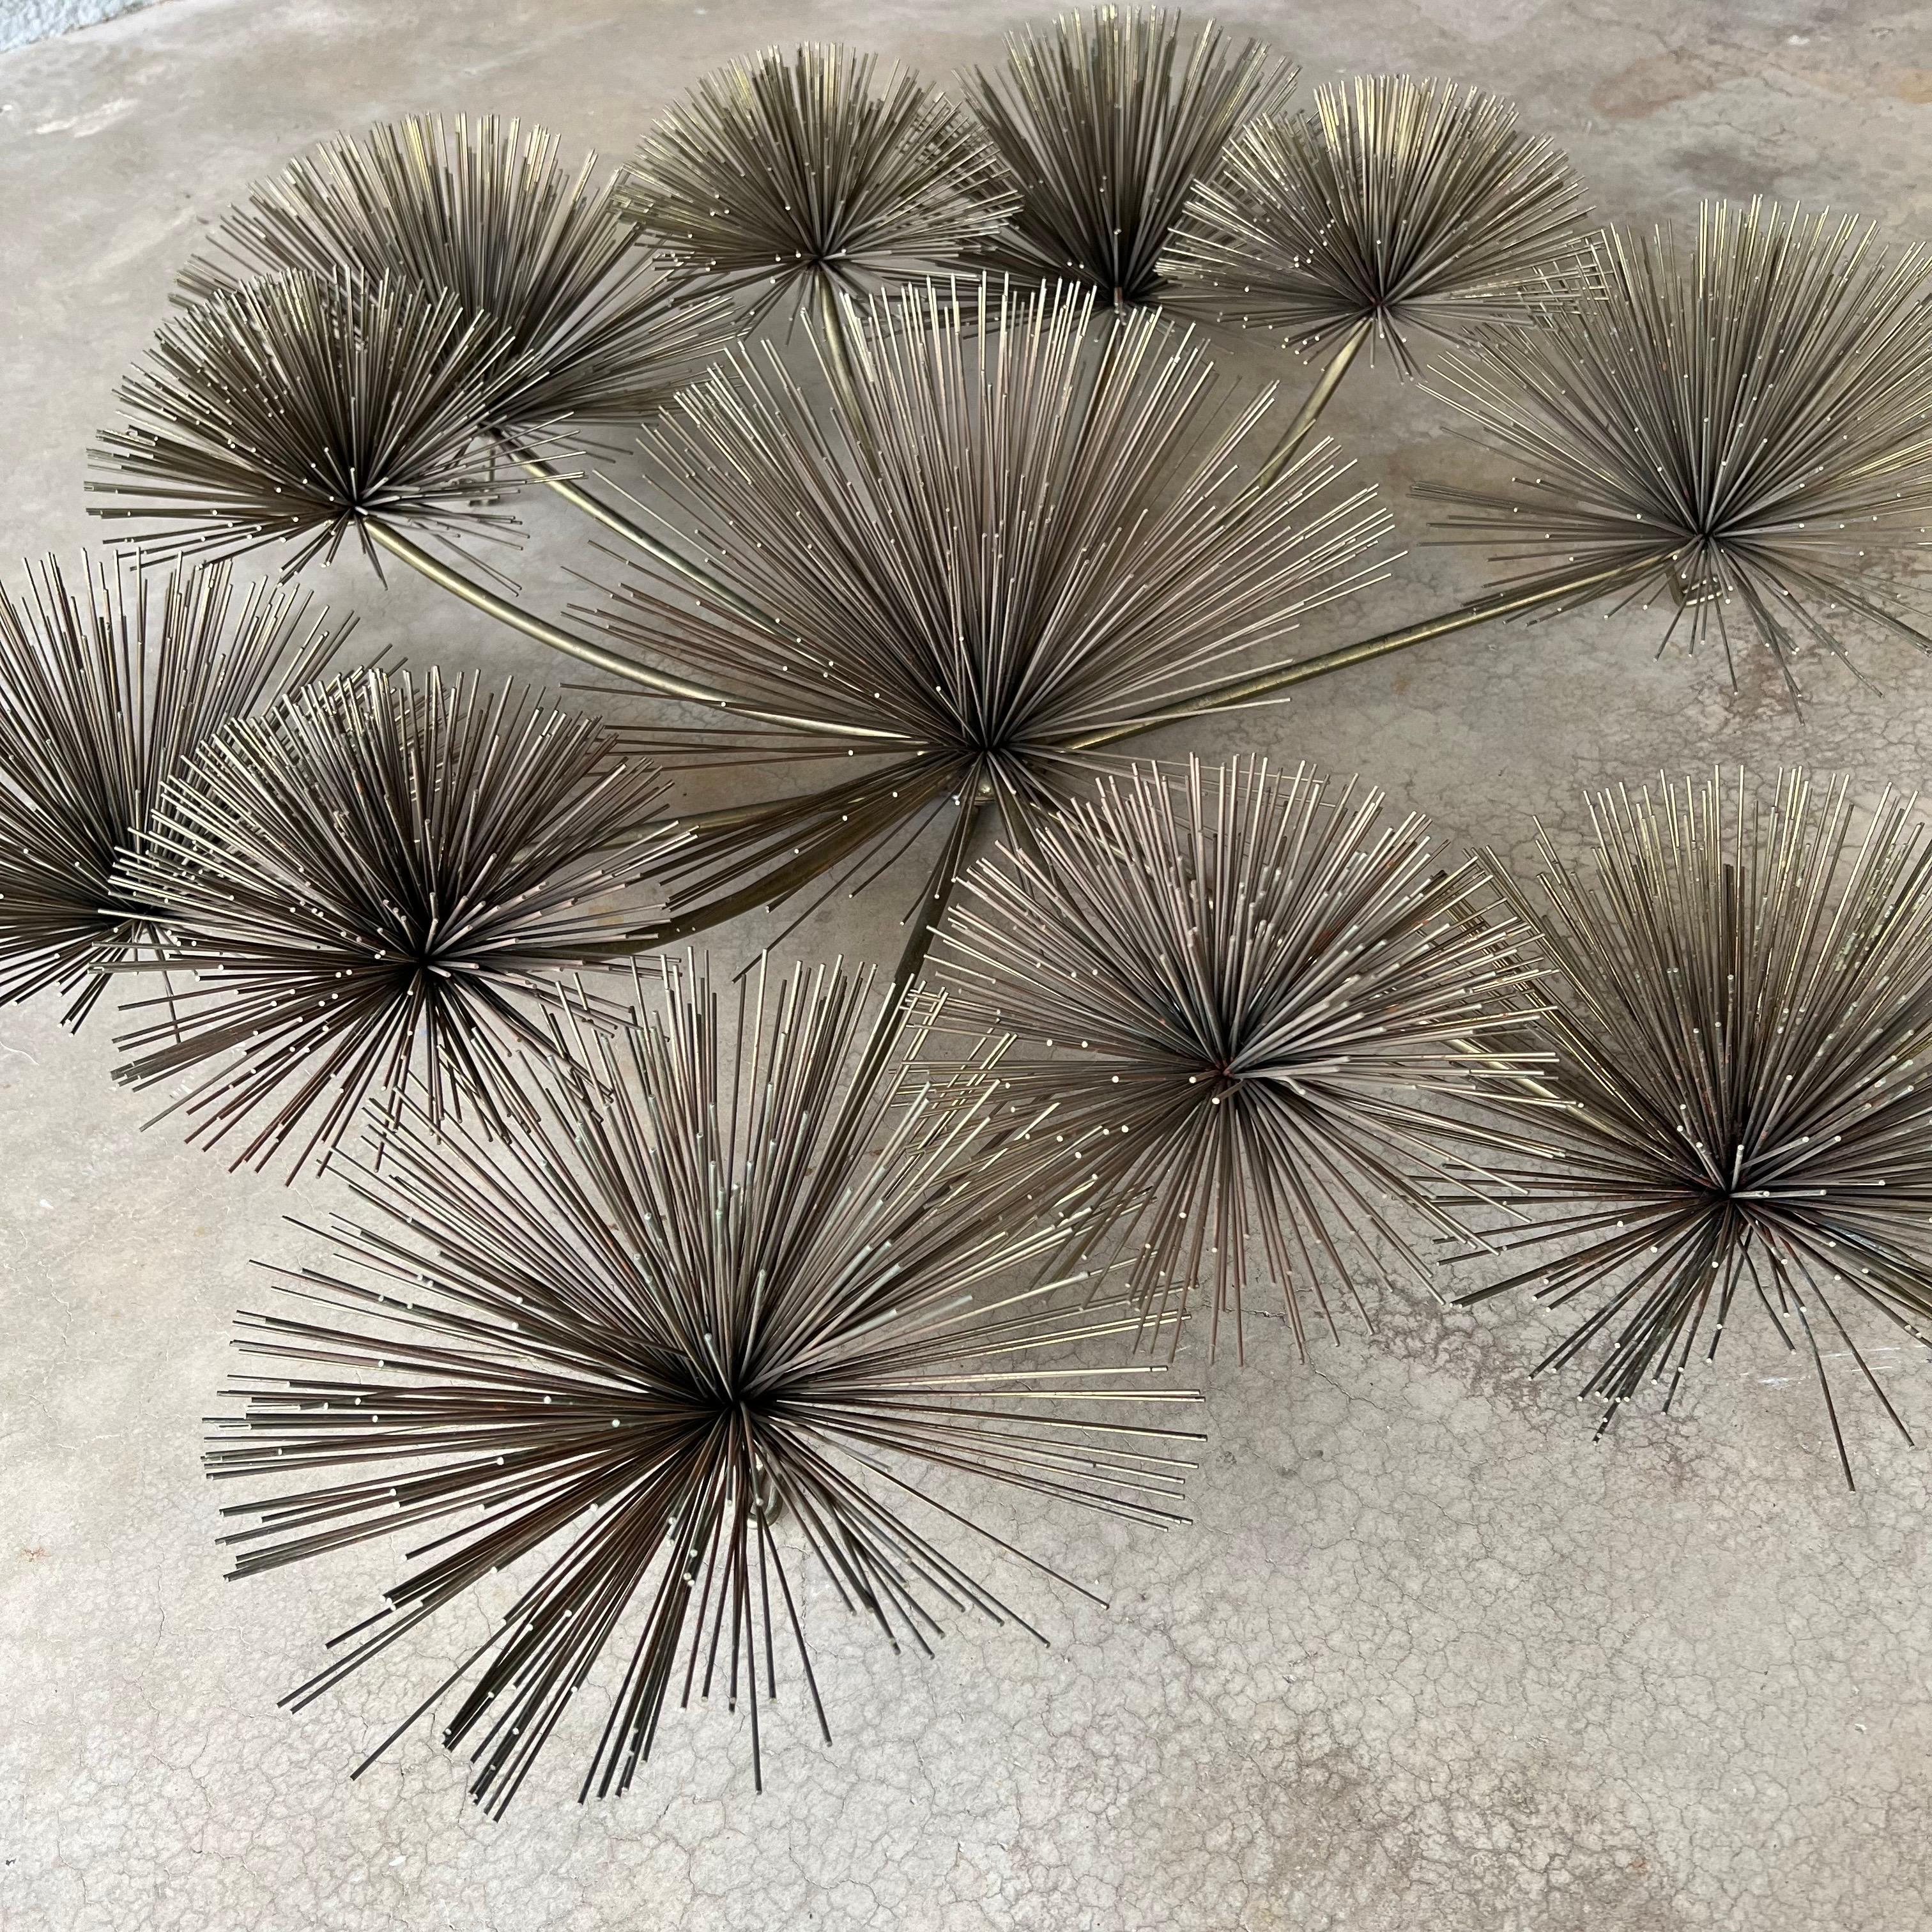 1979 C. Jeré Artisan House urchin or pom pom brass wall art. This is the much less common massive round version and measures about 40” wide and 10” deep. It features 12 urchins on curved stems. It is signed and dated with age-appropriate wear.